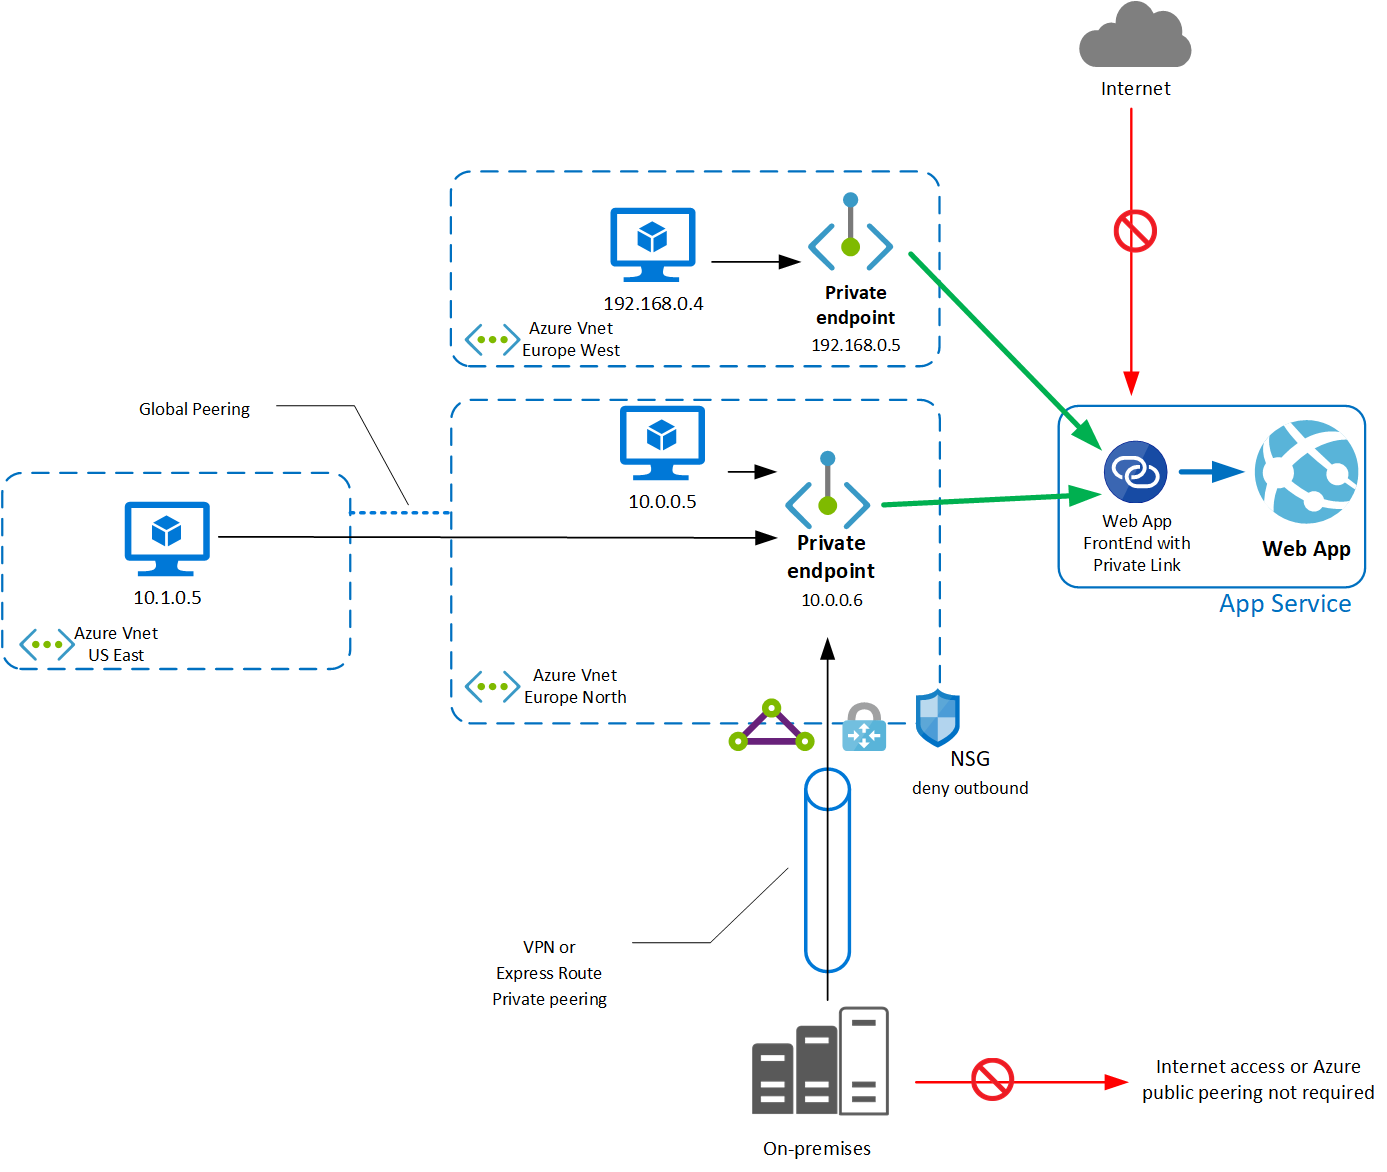 Connect Privately To An Azure Web App Using Private Endpoint